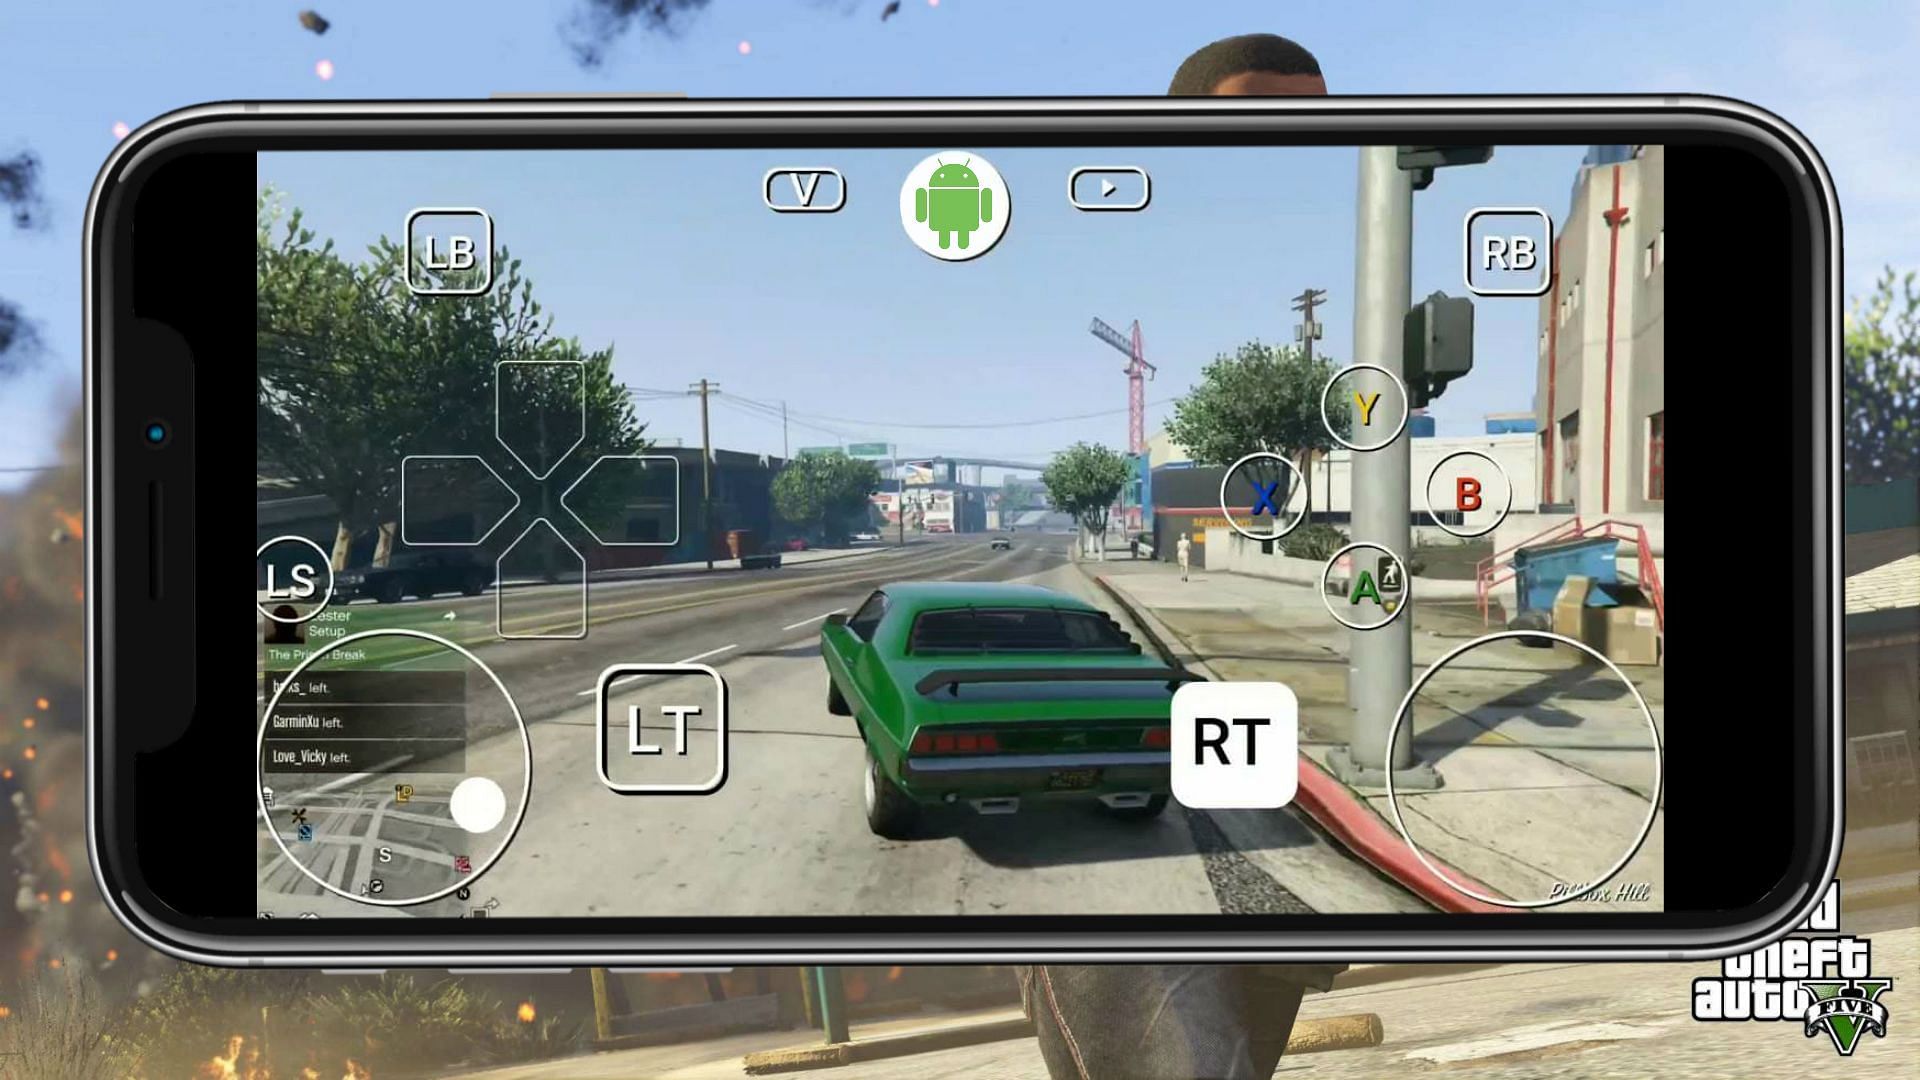 Why fans cannot expect GTA 5 Android port in 2022